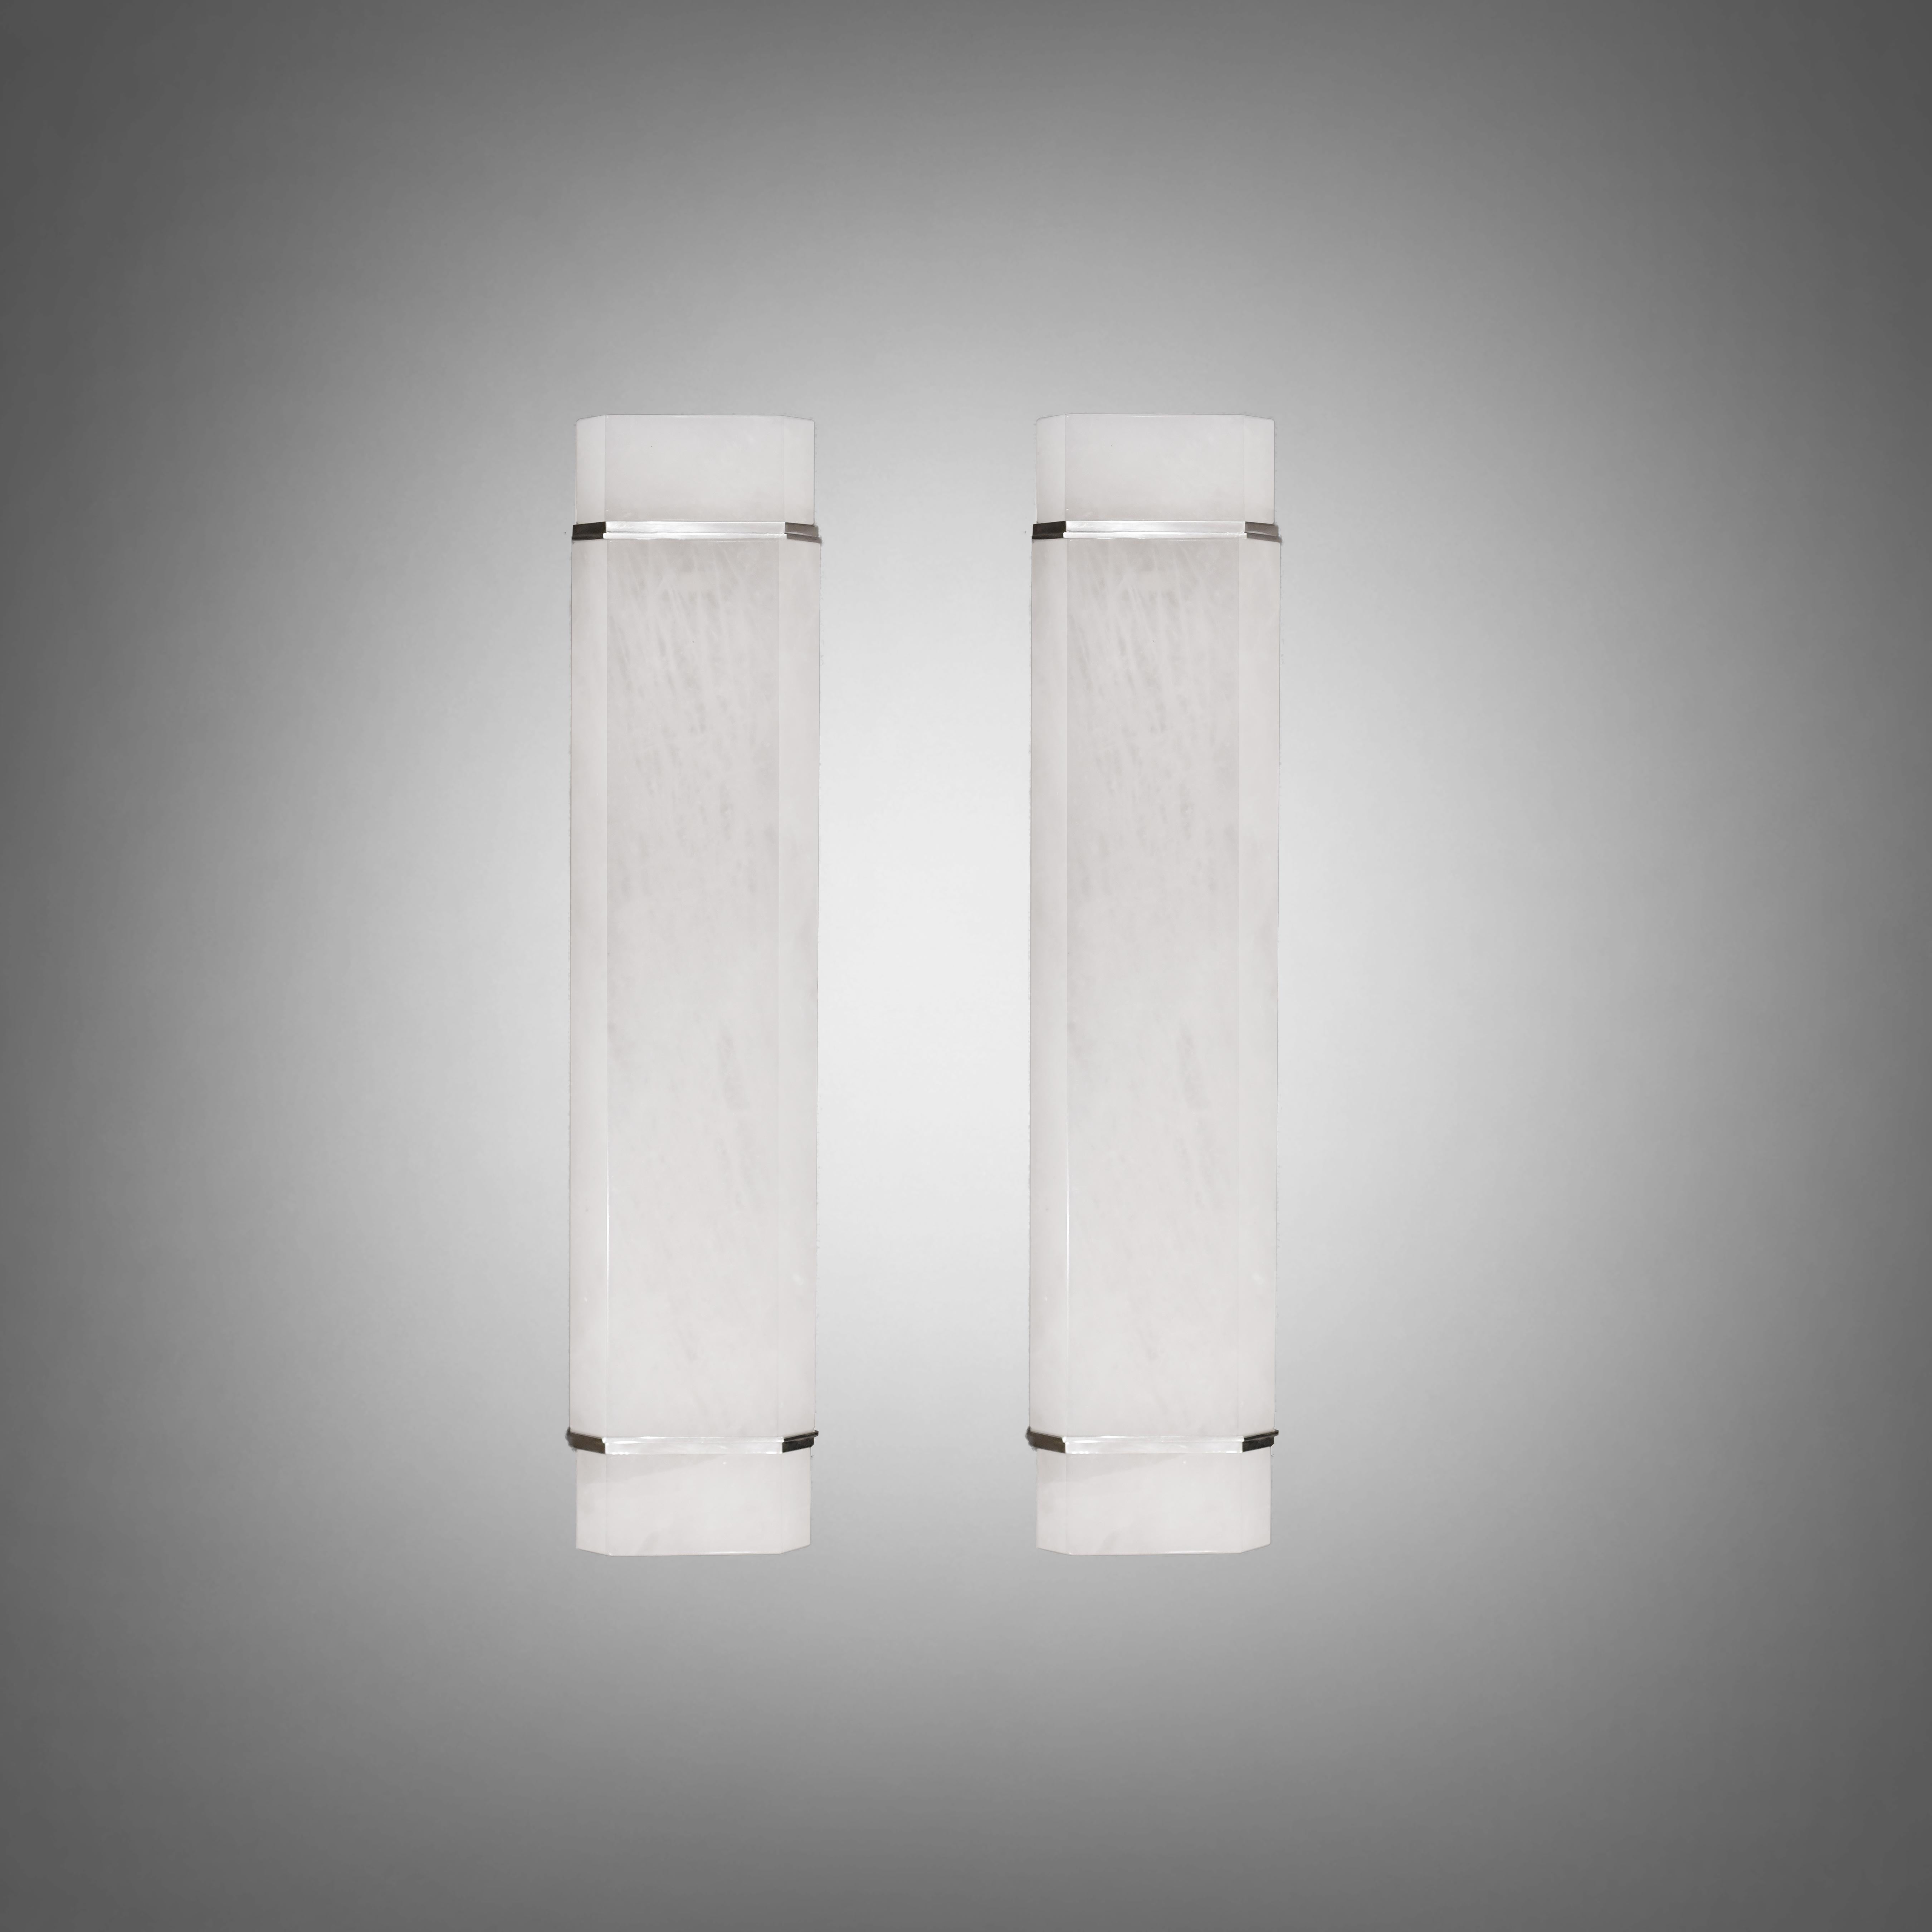 Pair of rock crystal sconces with nickel plating decoration. Create by Phoenix Gallery.
Each sconce installed with two E26 sockets. Use two 80 watts long tube LED warm light bulbs. 160w total.
Custom size upon request.